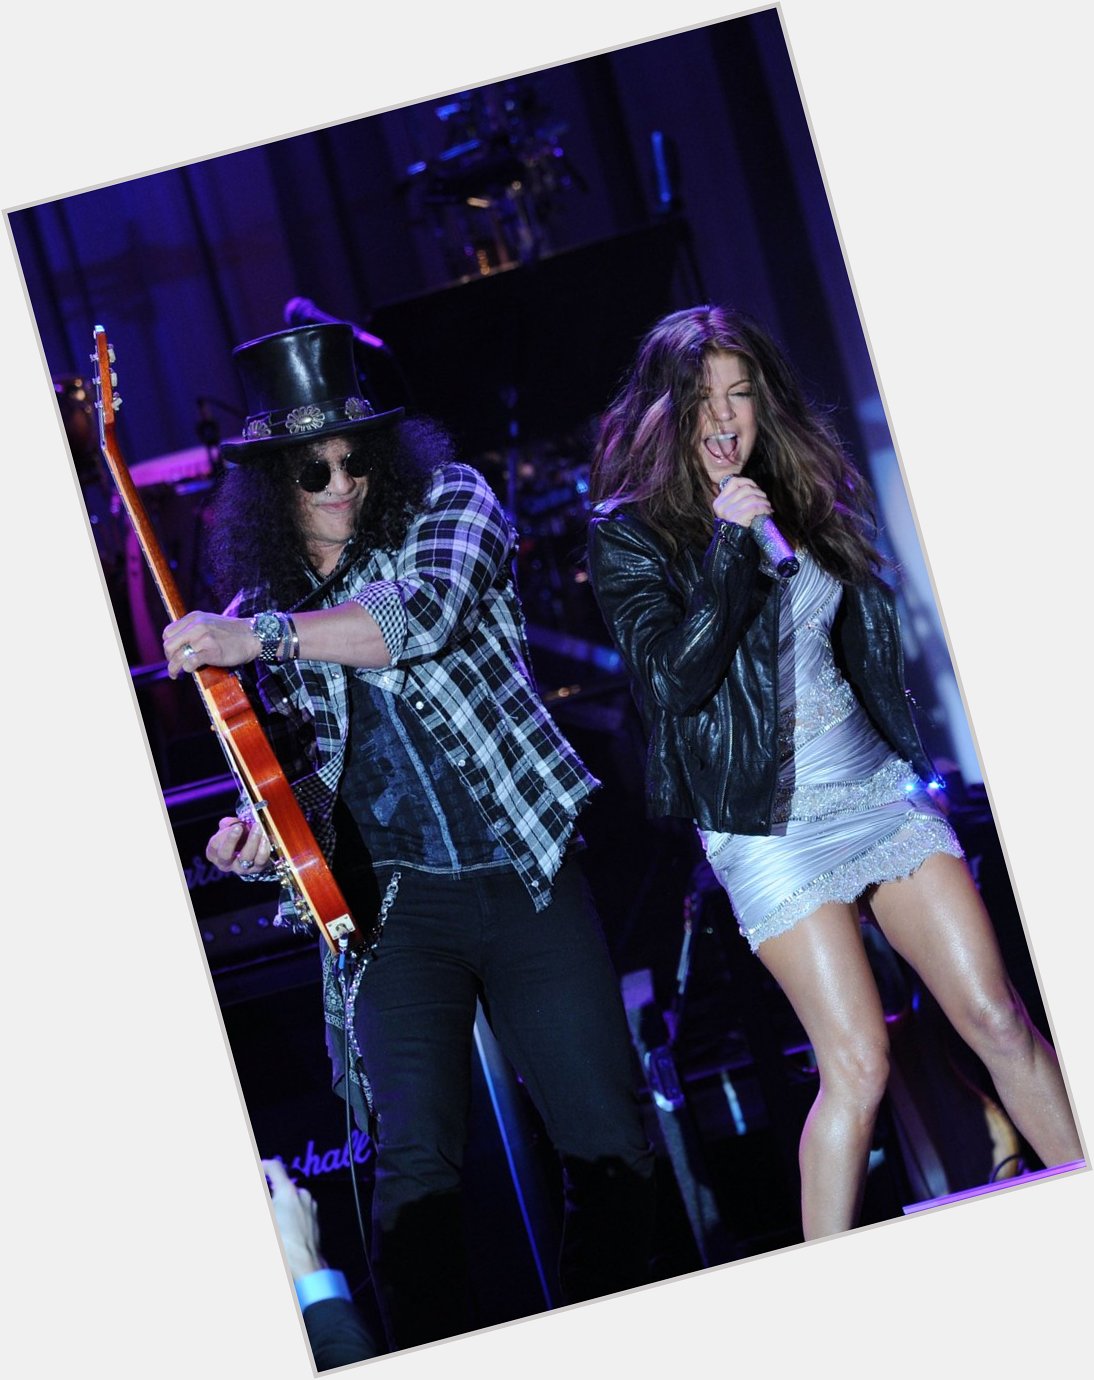 Happy 48th Birthday Do you think Slash is jealous that named her son Axl? 